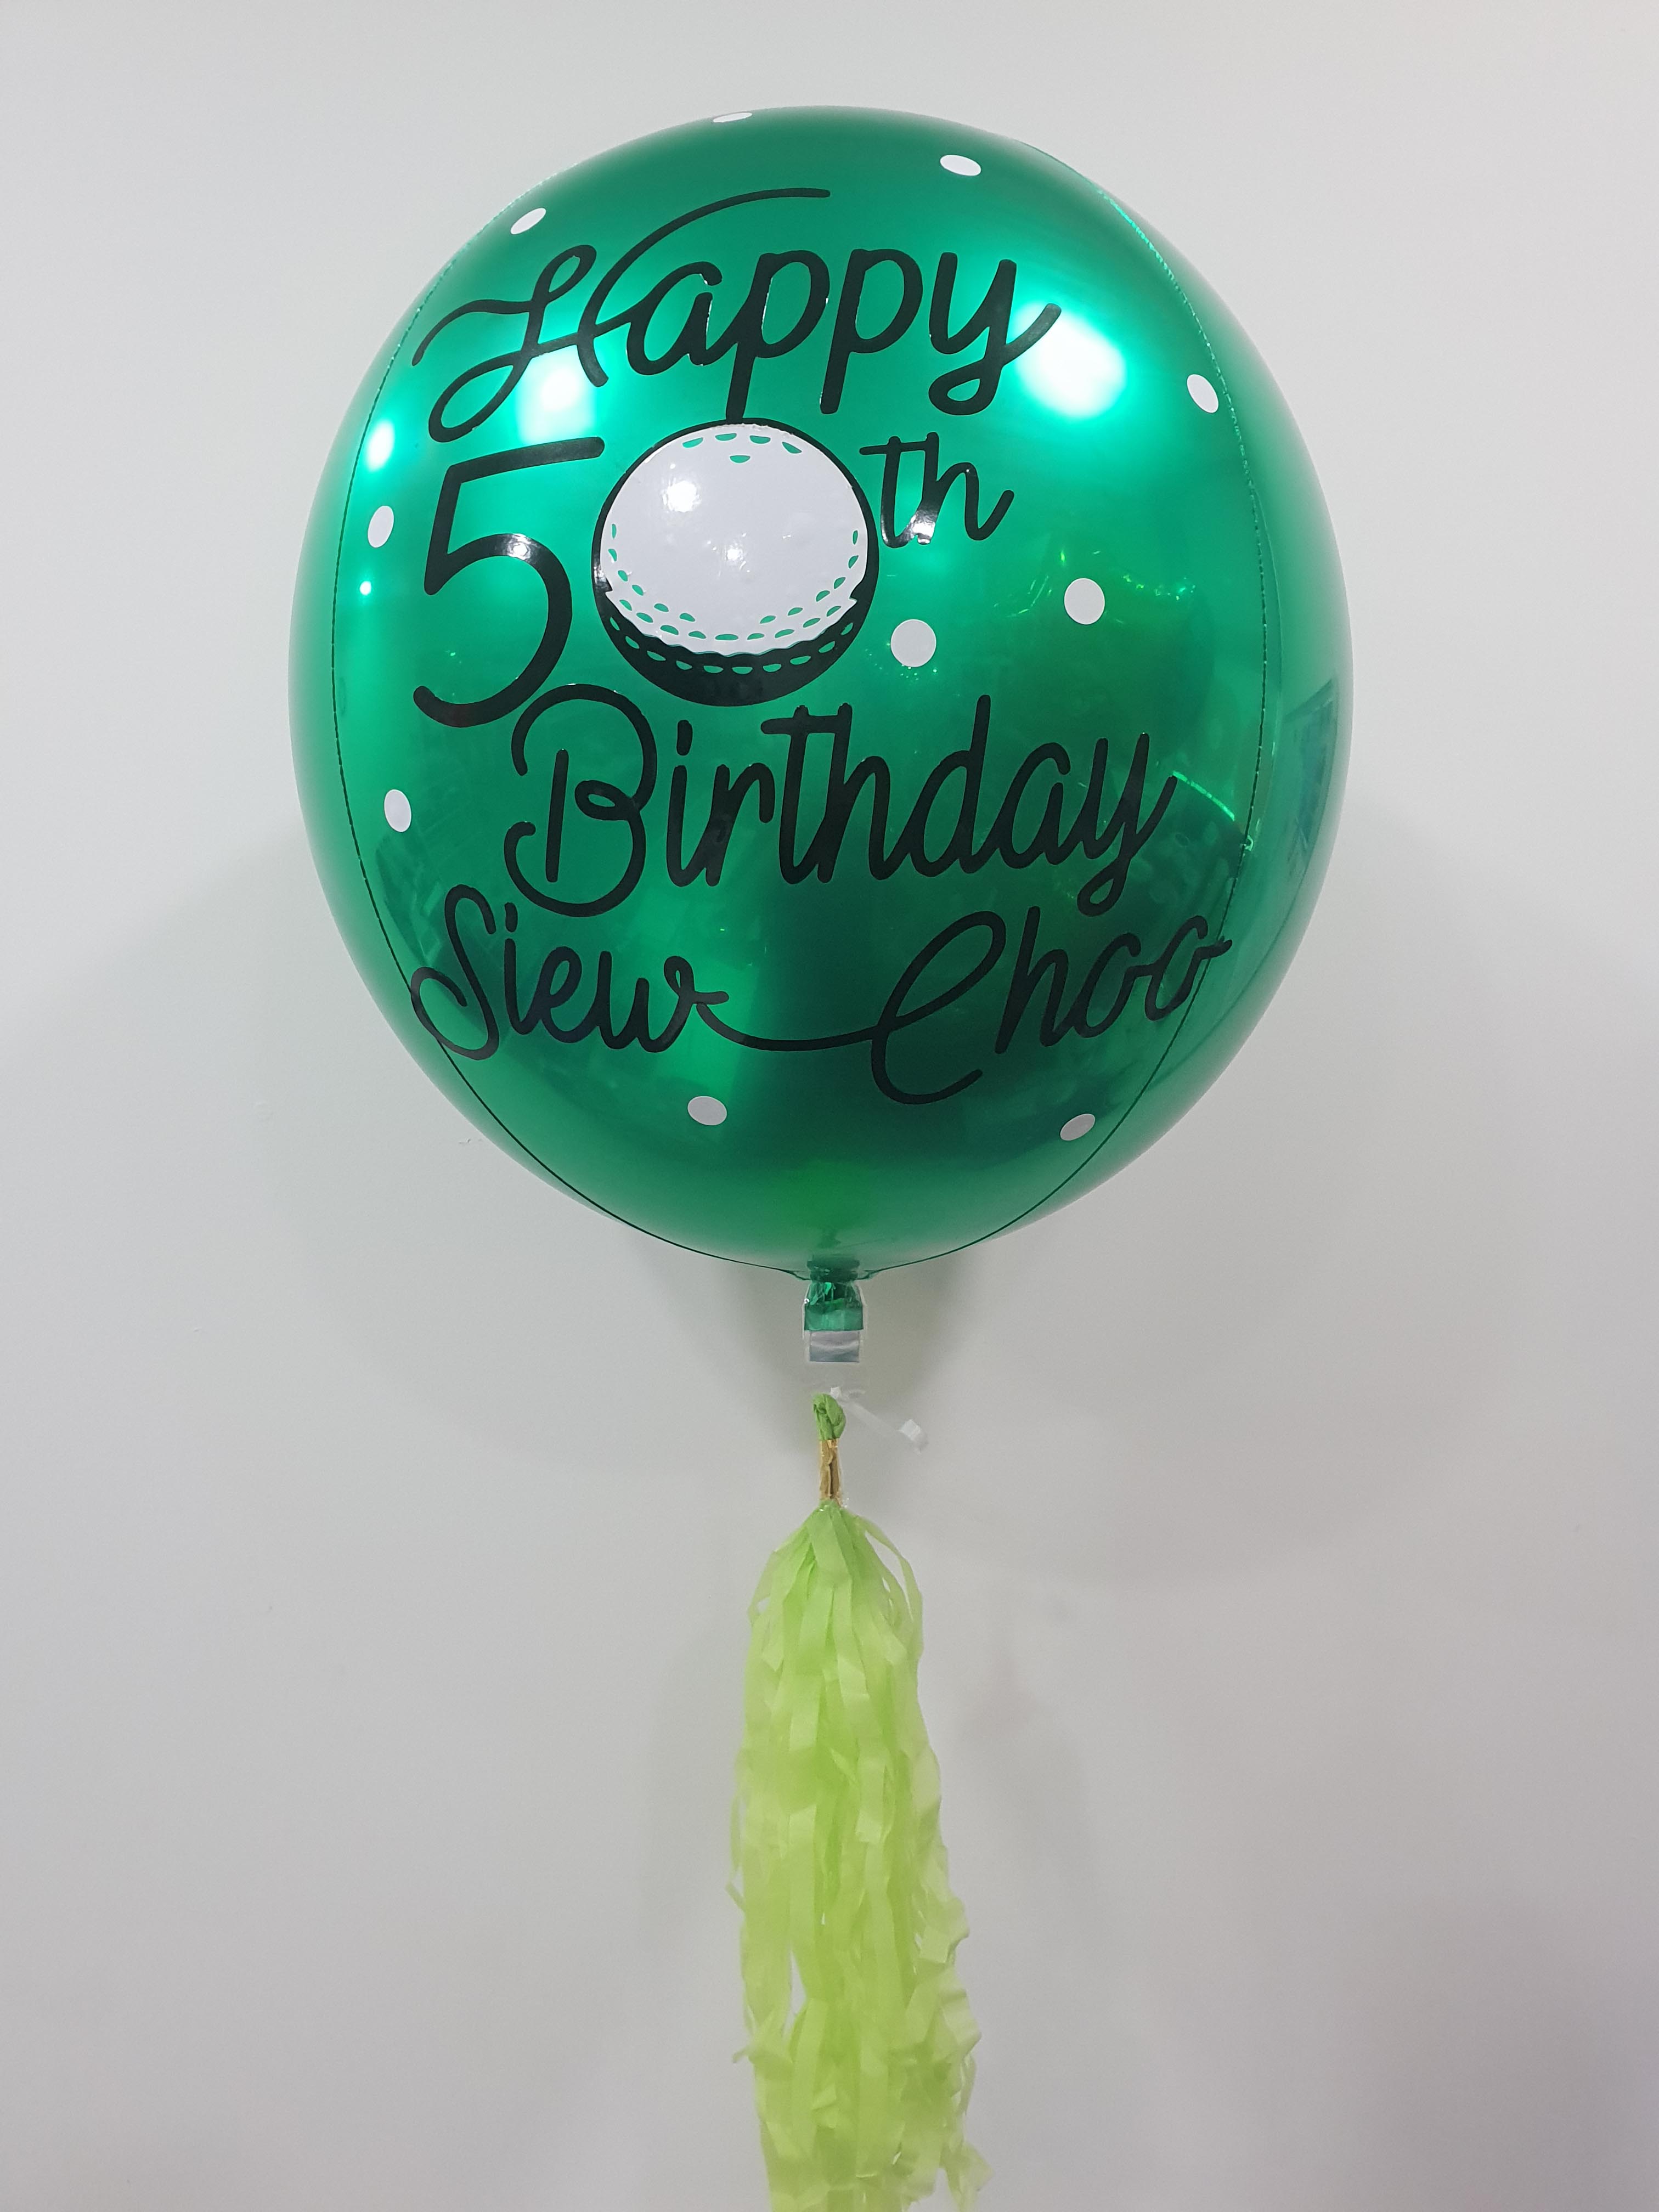 Customize Golf Themed Orbz Balloon Orbz Golf 19 90 Harvest Well Balloon And Party Supplies Helium Balloon Singapore Balloon Online Balloon